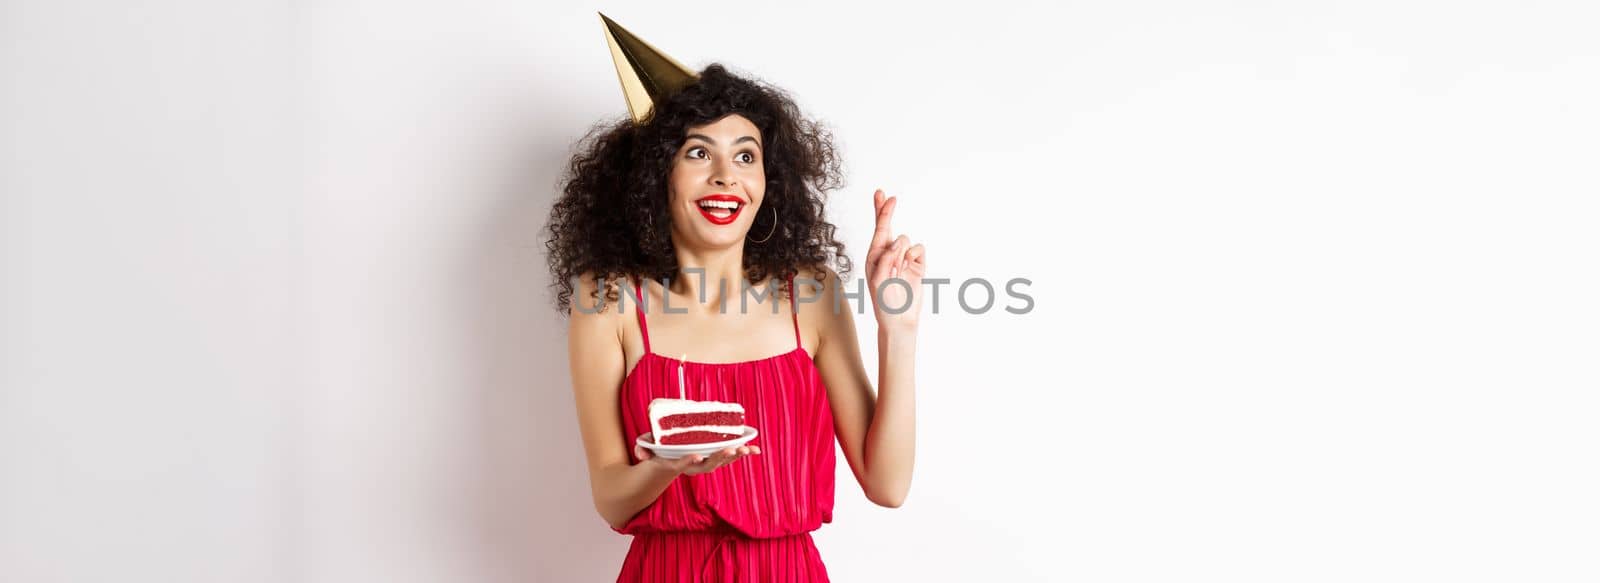 Excited birthday girl making wish, cross fingers good luck and looking aside at logo, celebrating bday, holding piece of cake, white background.